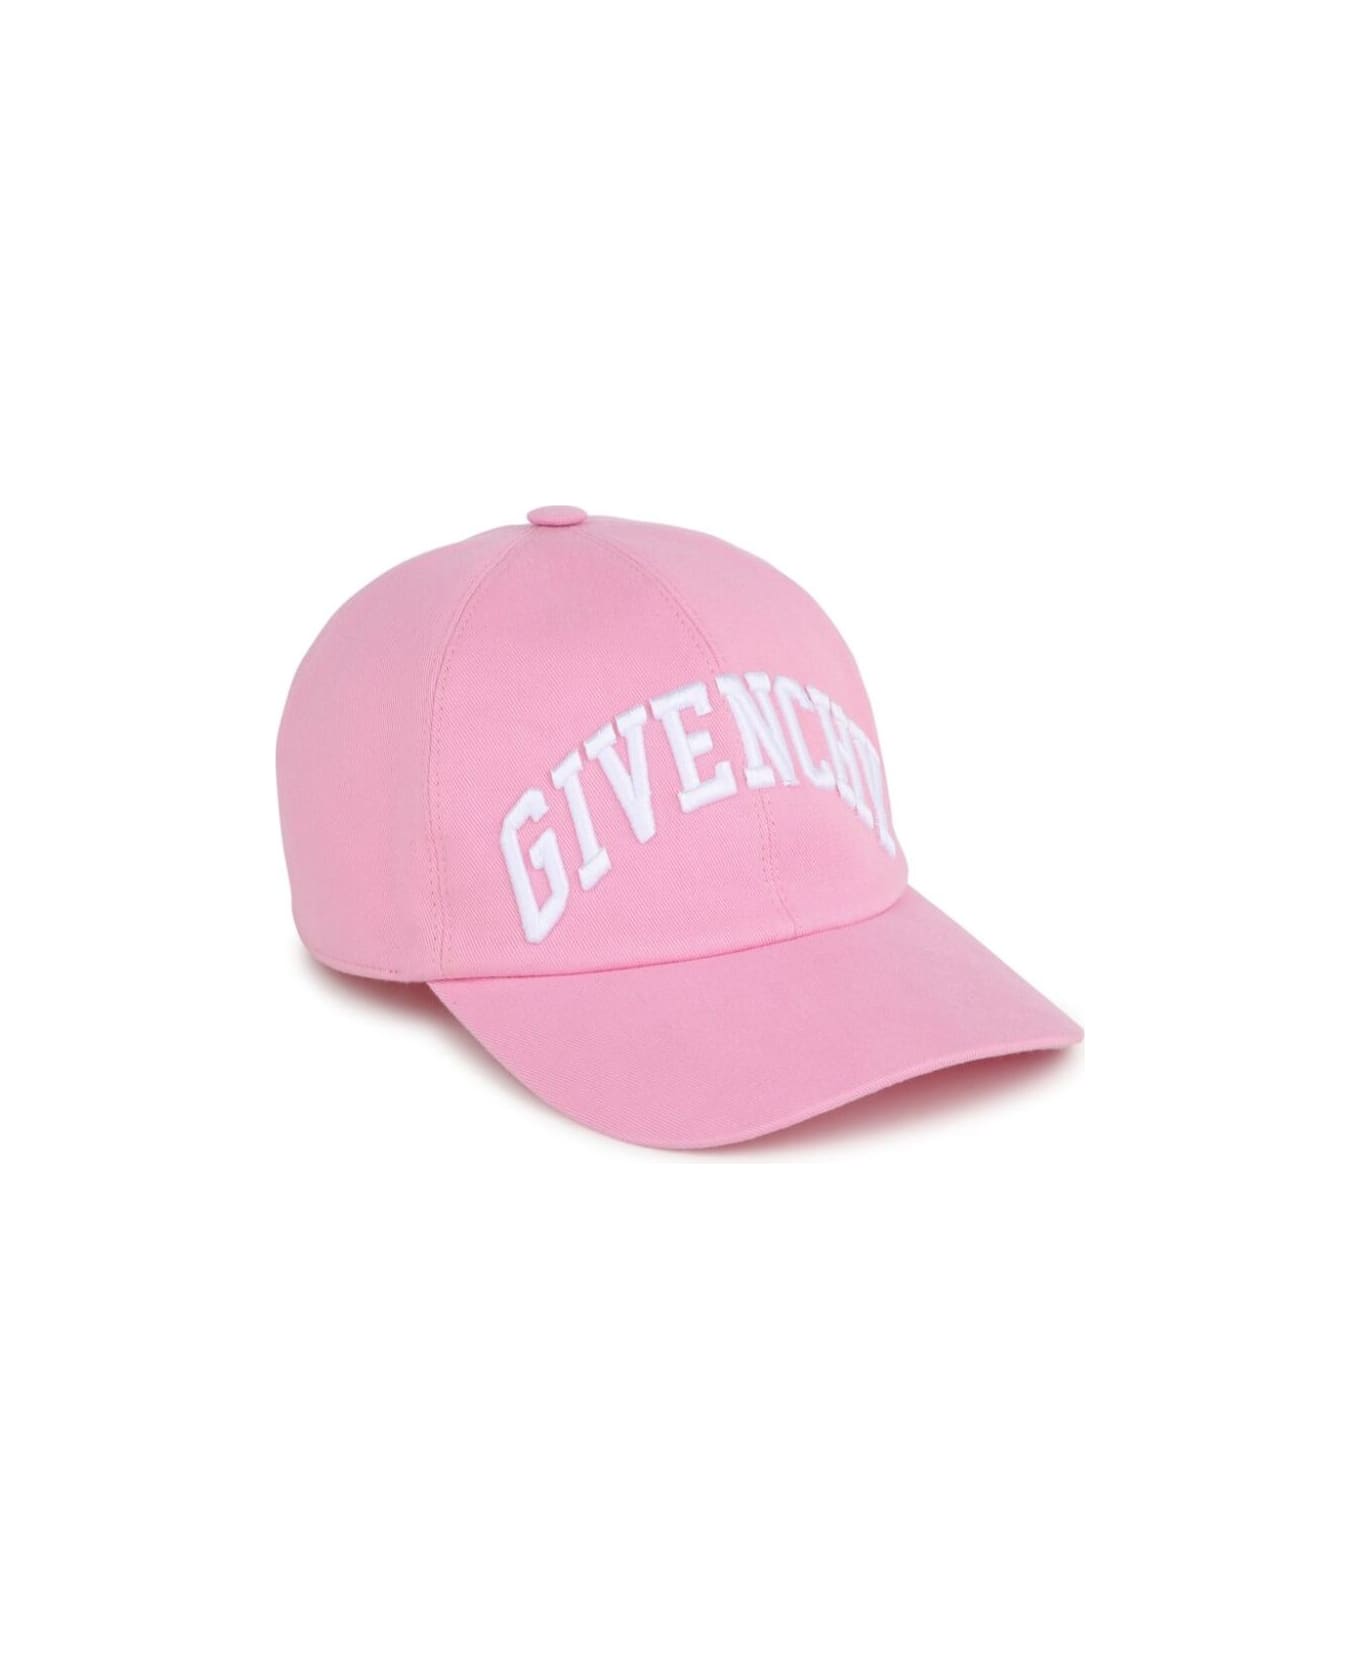 Givenchy Logo Embossed Cap - Pink